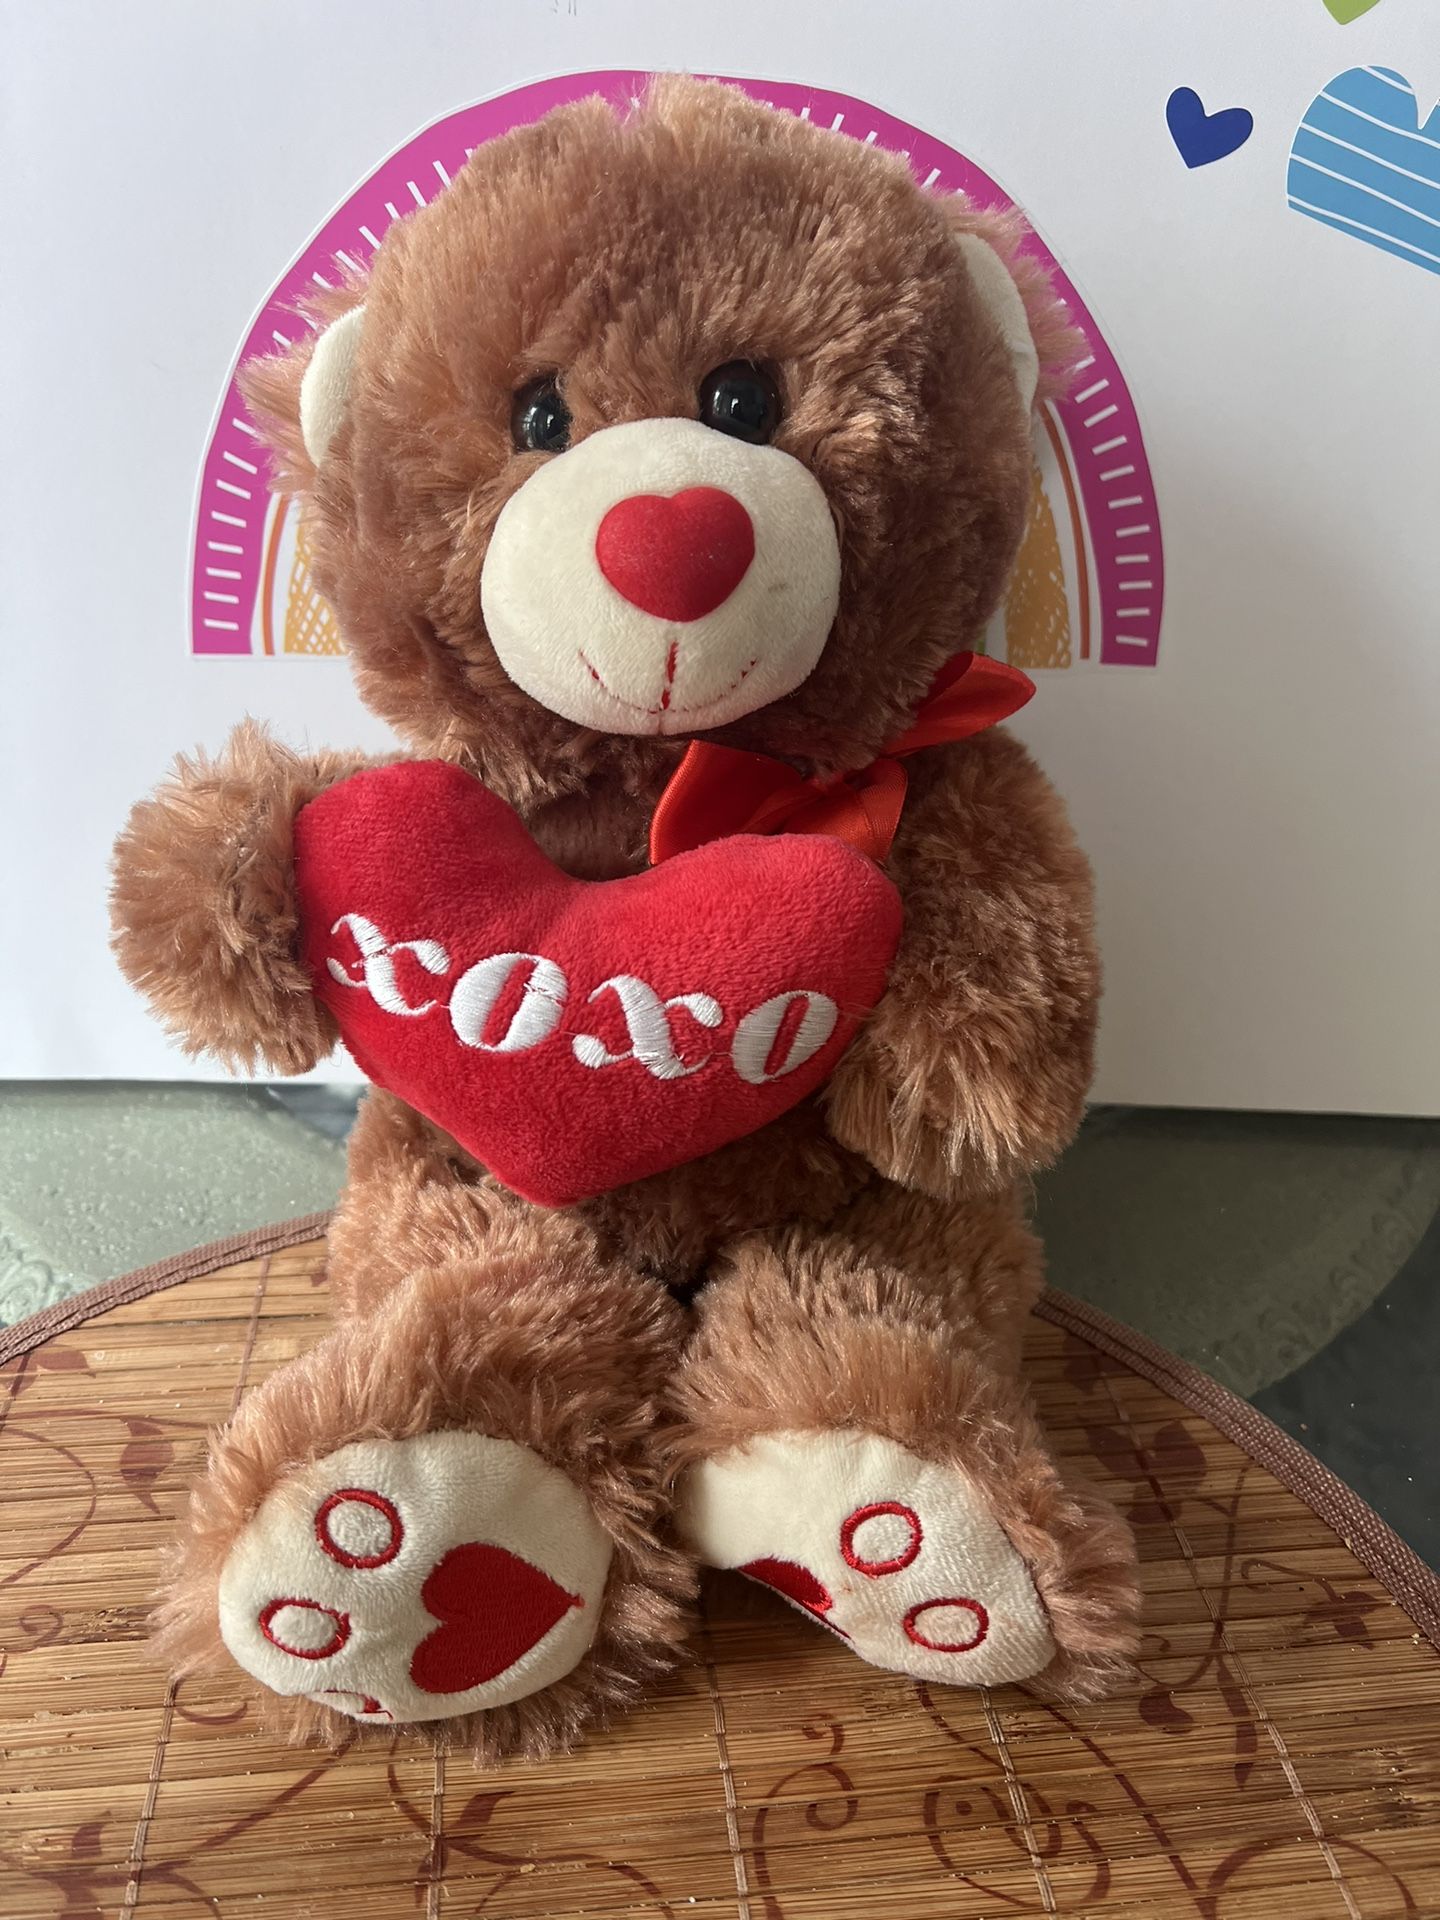 TEDDY BEAR - BROWN WITH RED HEART! 14 INCH